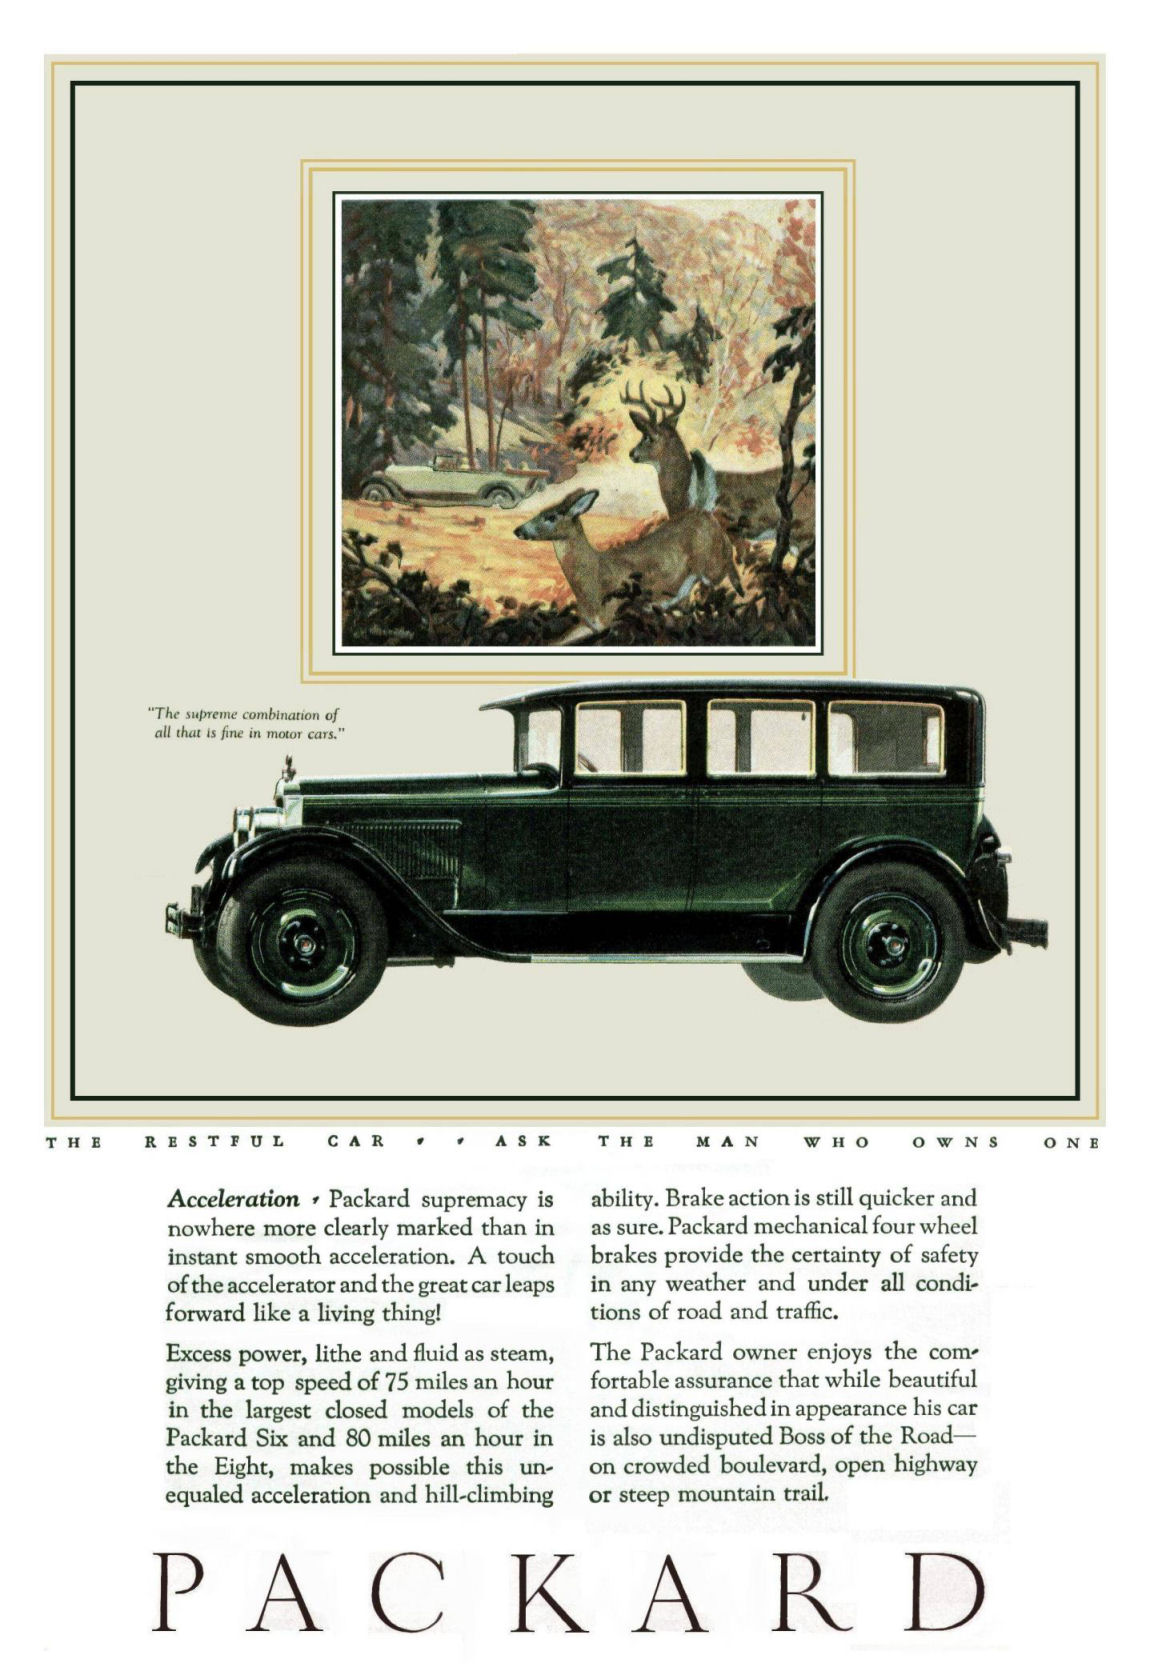 1927 Packard Auto Advertising